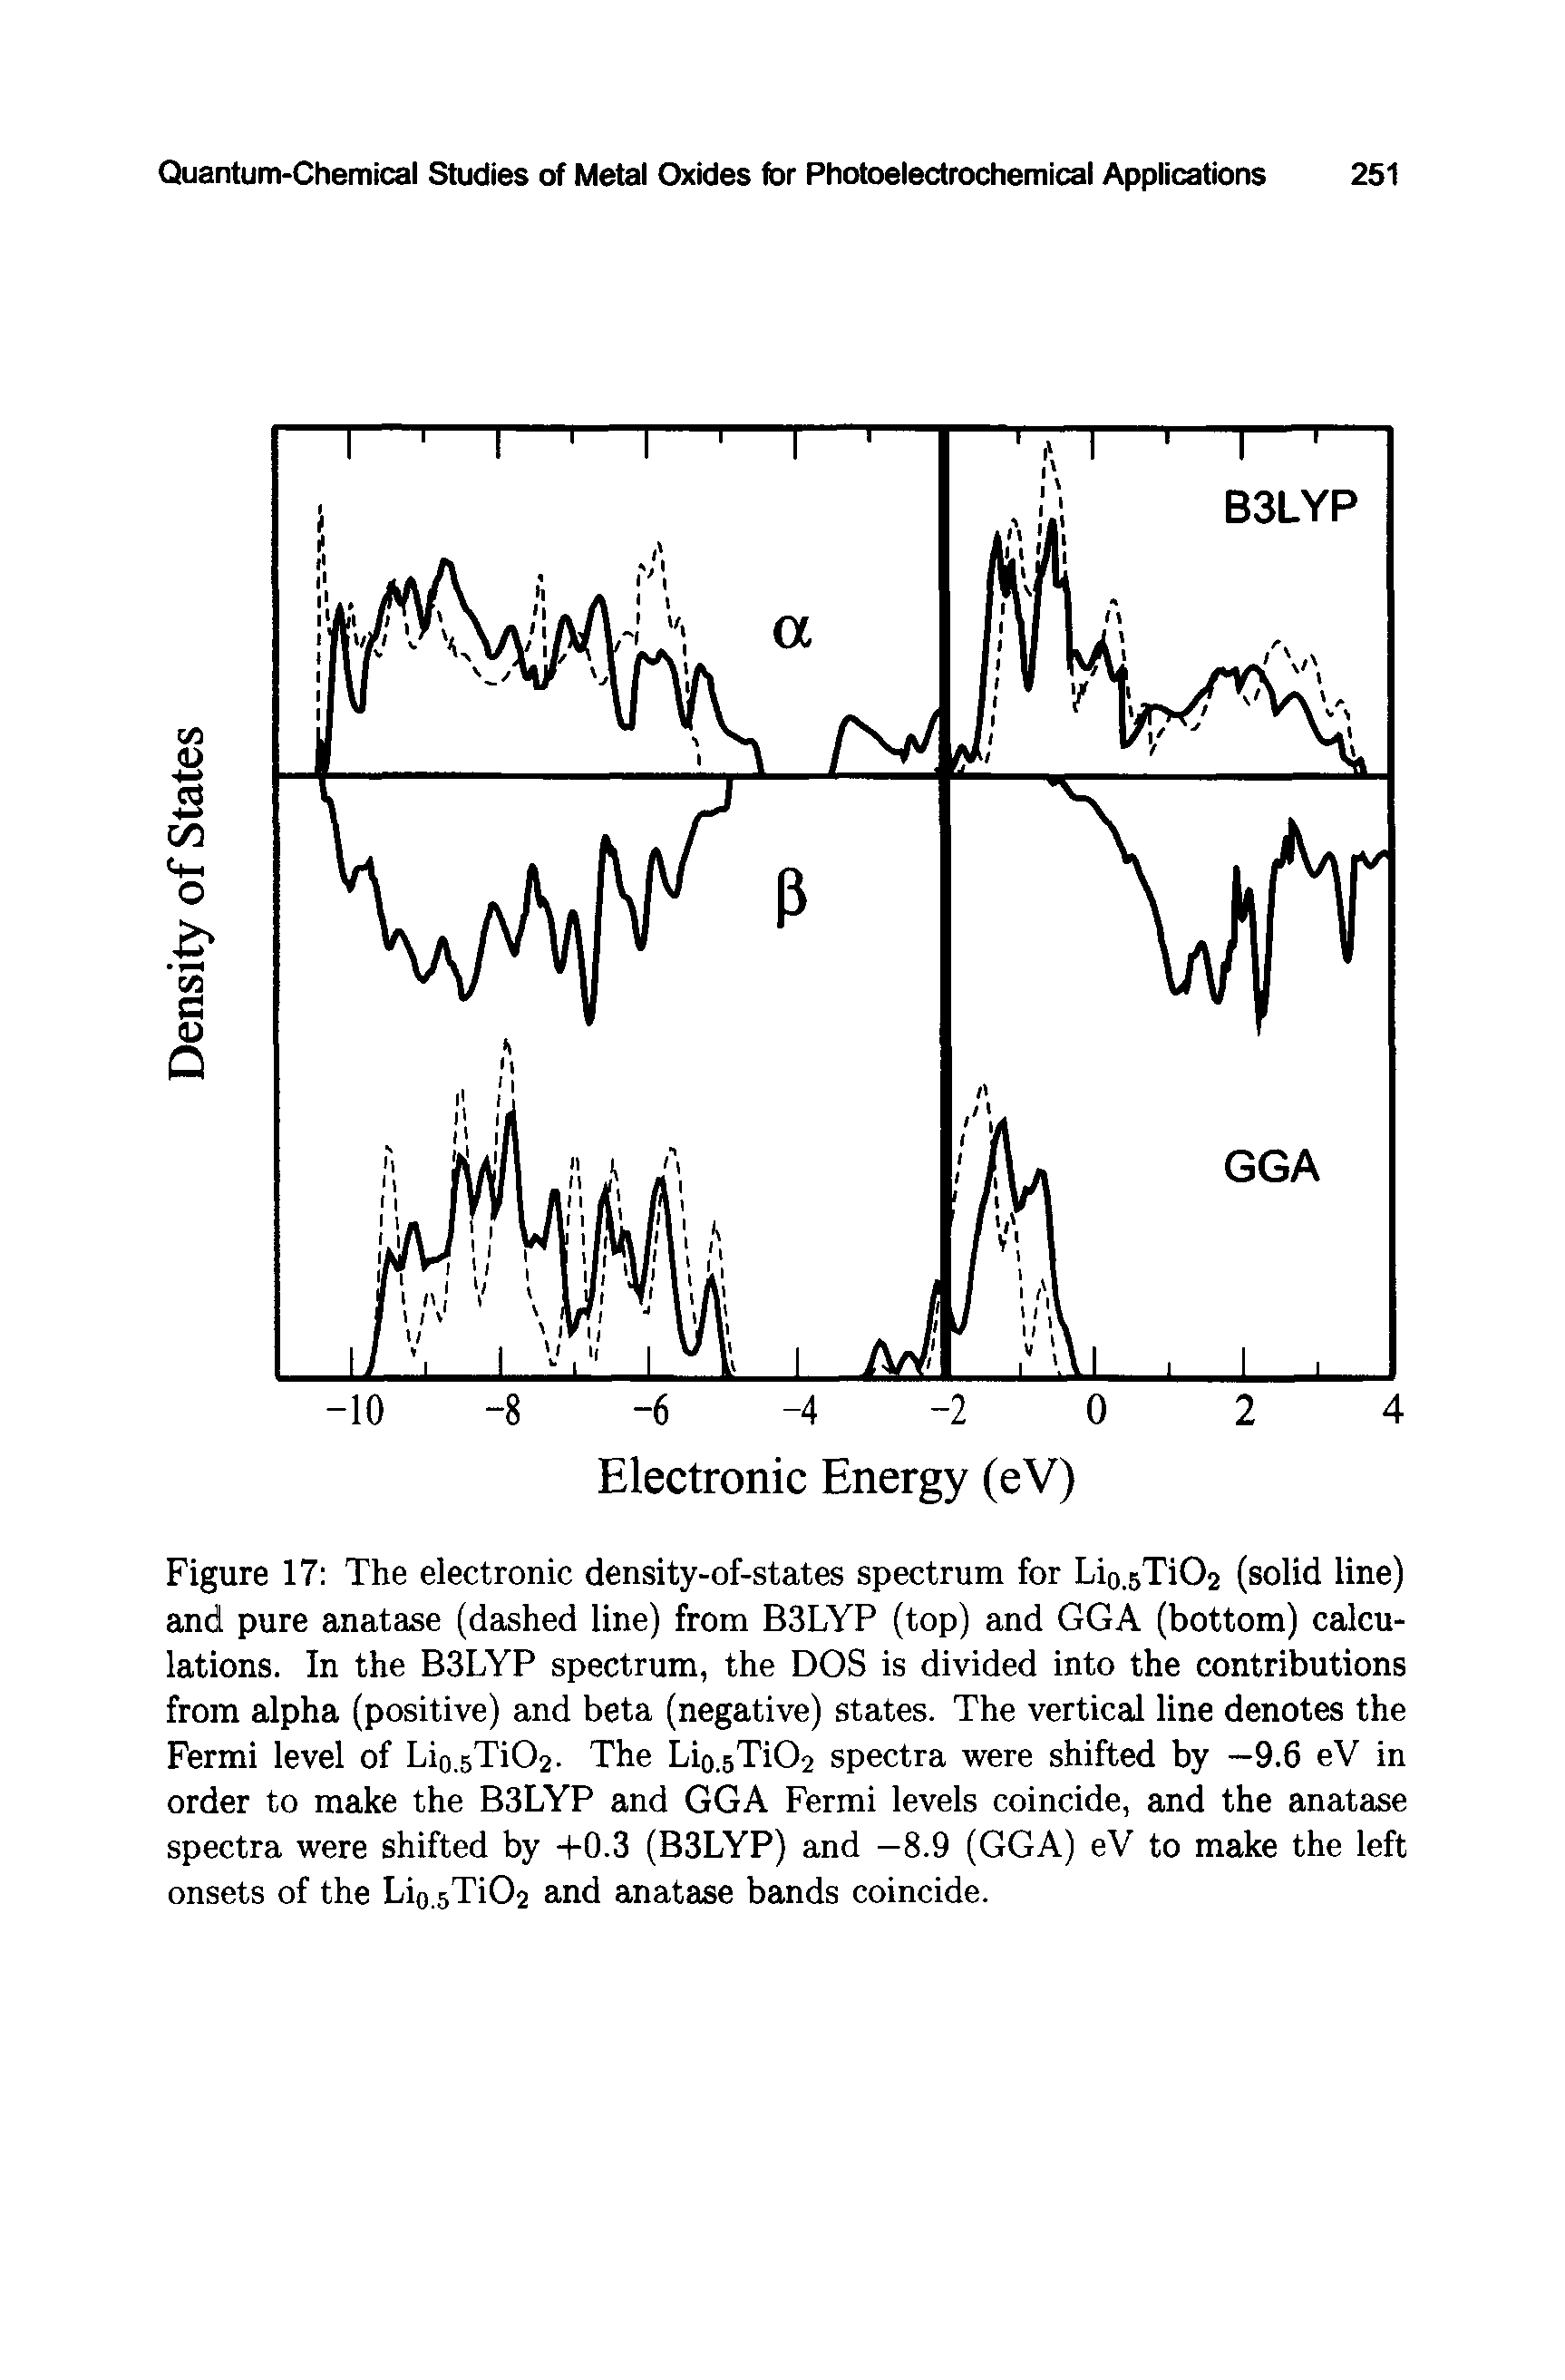 Figure 17 The electronic density-of-states spectrum for Lio.sTiC (solid line) and pure anatase (dashed line) from B3LYP (top) and GGA (bottom) calculations. In the B3LYP spectrum, the DOS is divided into the contributions from alpha (positive) and beta (negative) states. The vertical line denotes the Fermi level of Li0.5TiO2- The Lio.sTi02 spectra were shifted by —9.6 eV in order to make the B3LYP and GGA Fermi levels coincide, and the anatase spectra were shifted by +0.3 (B3LYP) and —8.9 (GGA) eV to make the left onsets of the Lio.sTi02 and anatase bands coincide.